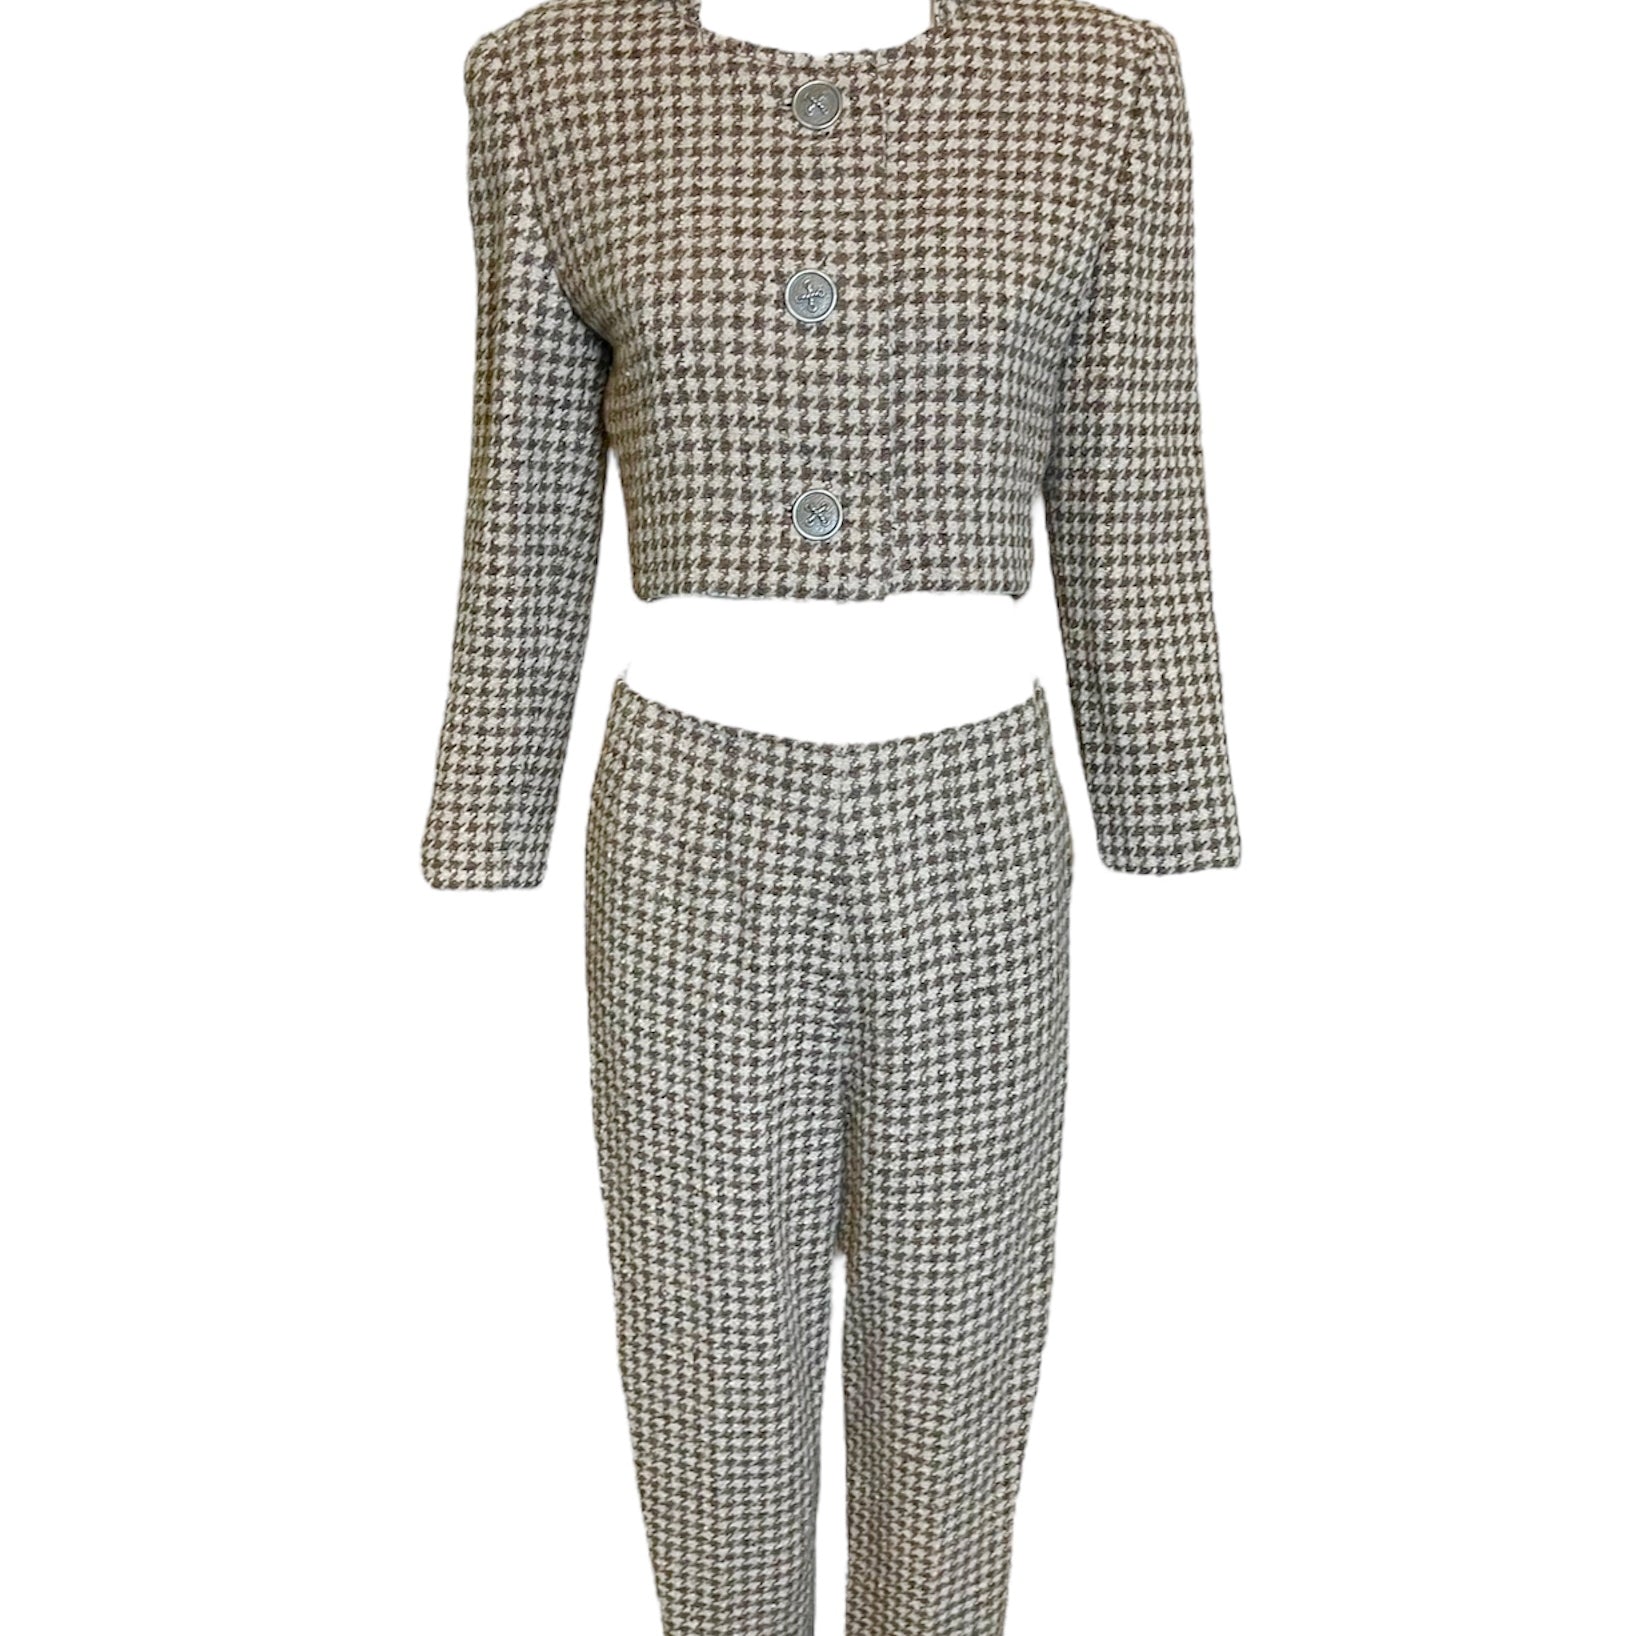 Galanos Houndstooth 2-Piece Cropped Jacket and Pants Ensemble FRONT 1 of 5